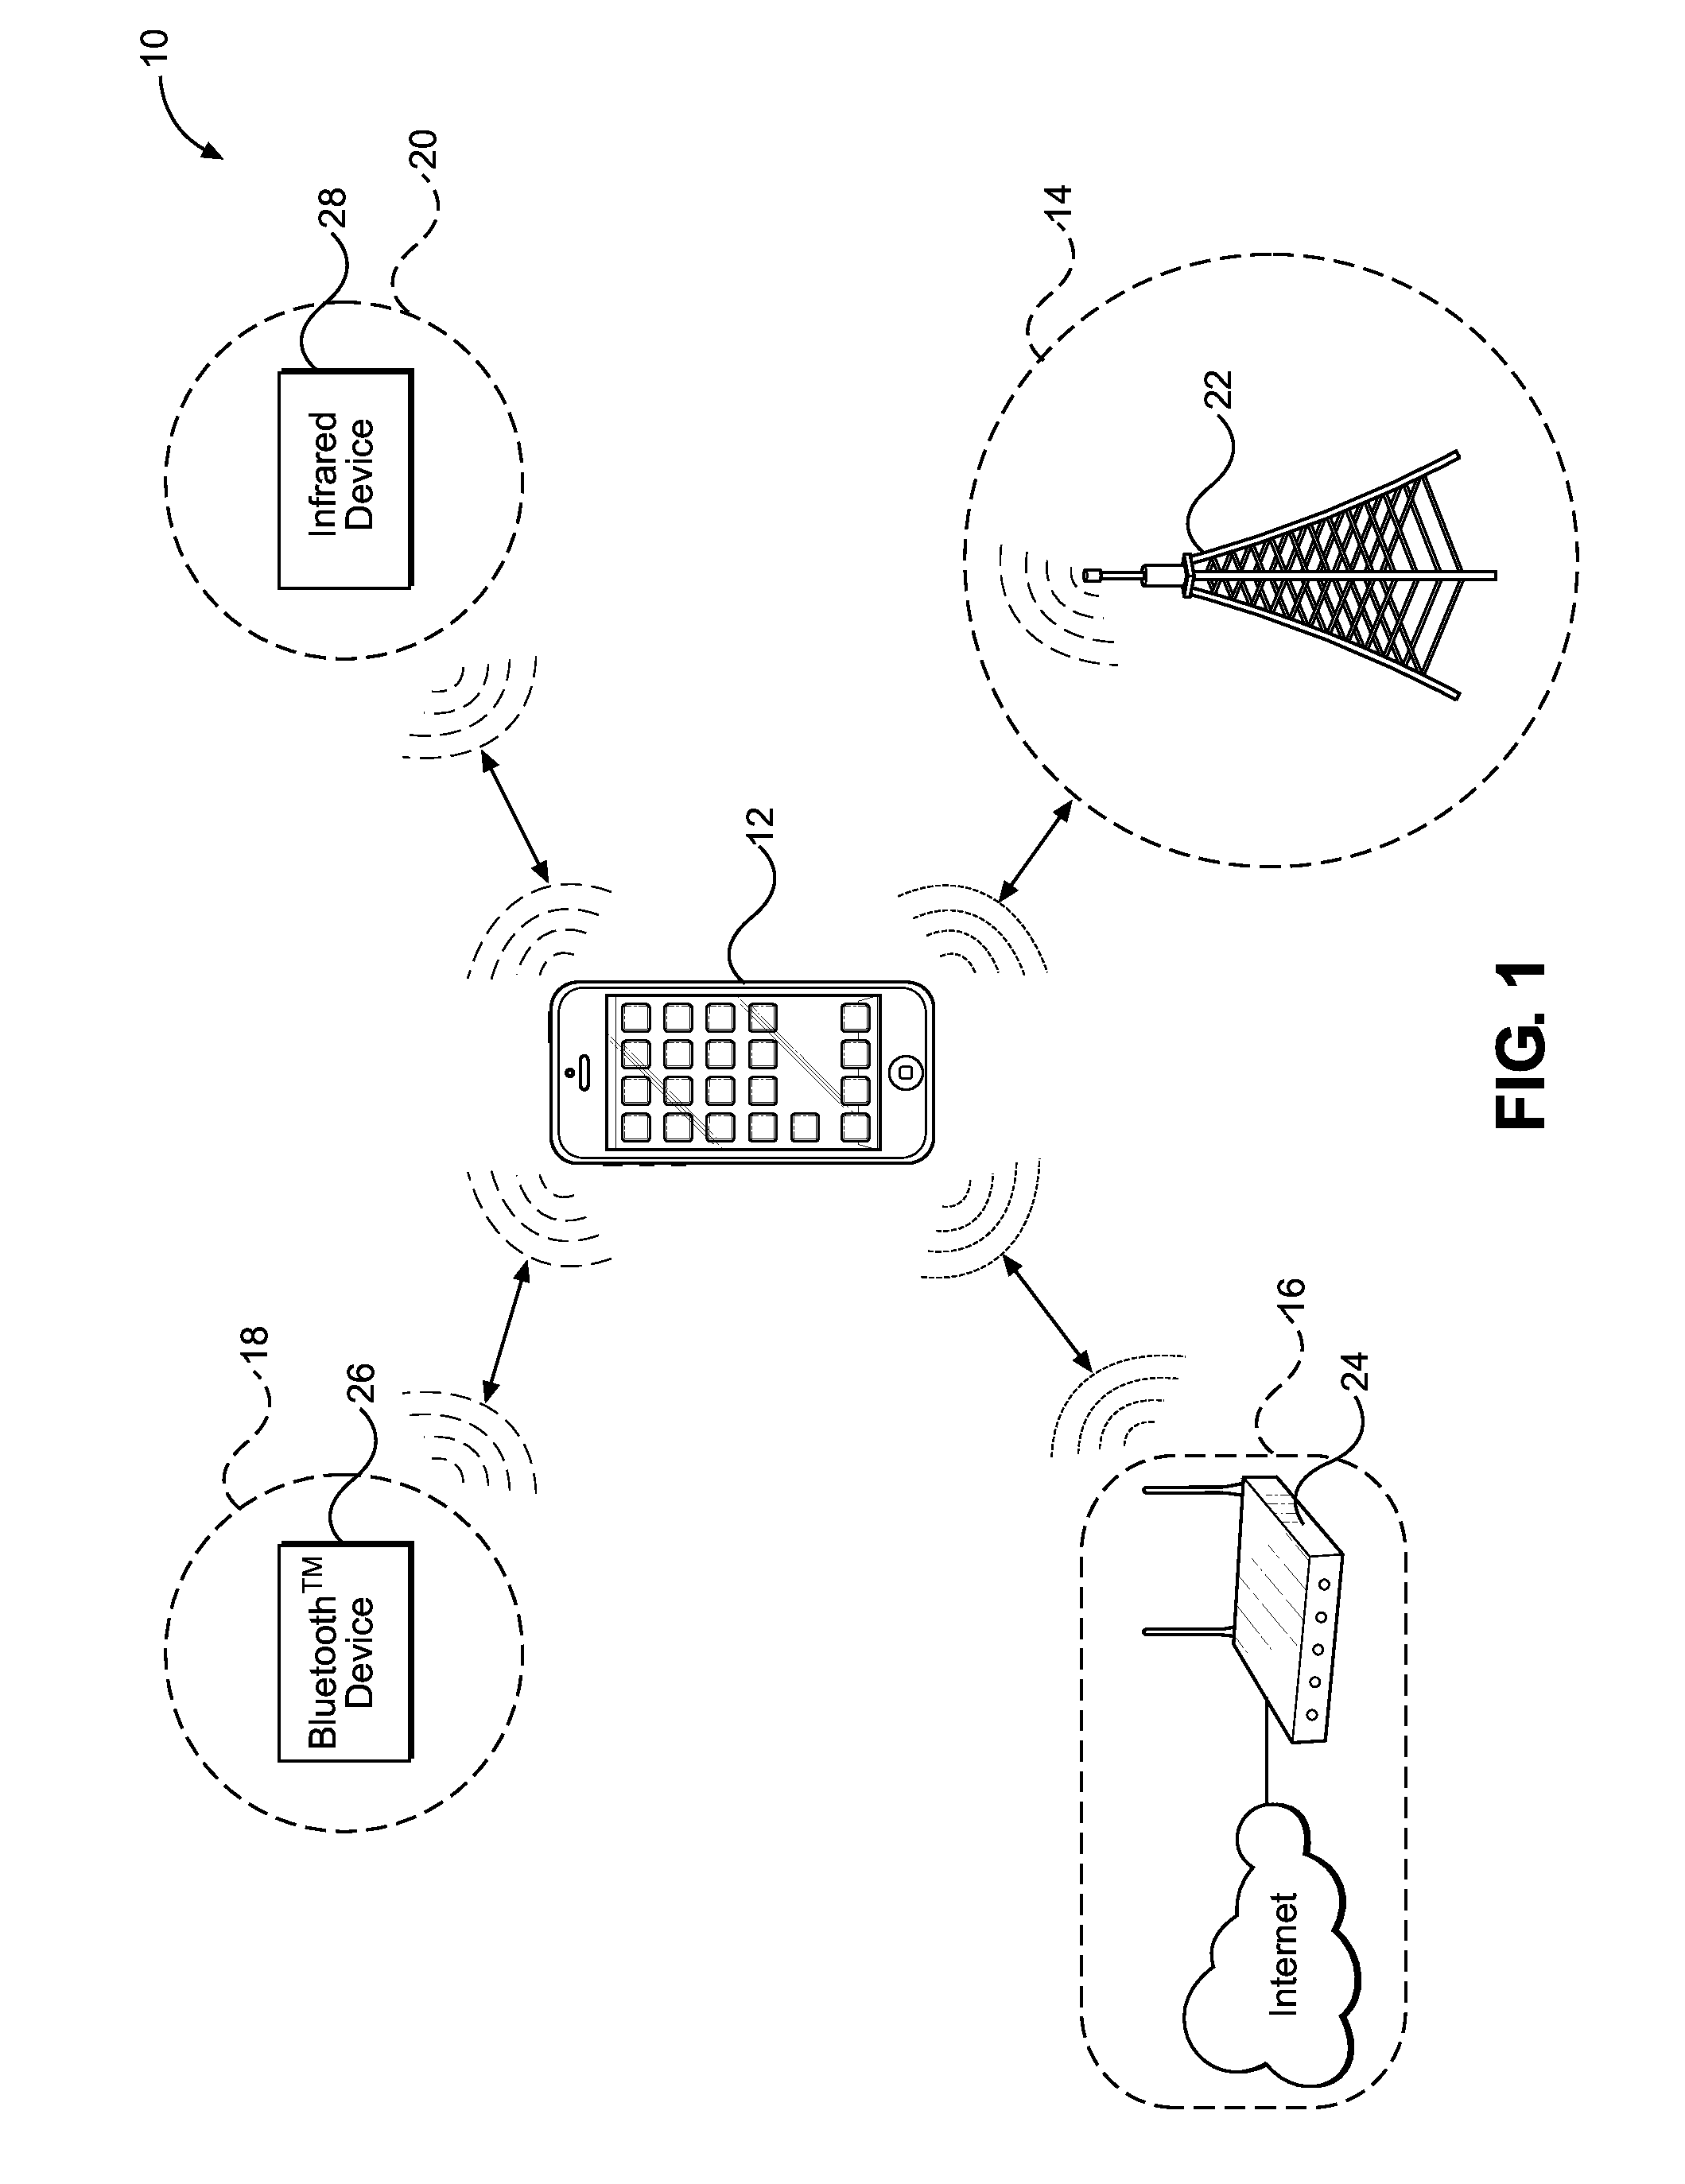 Dynamic interface management for interference mitigation